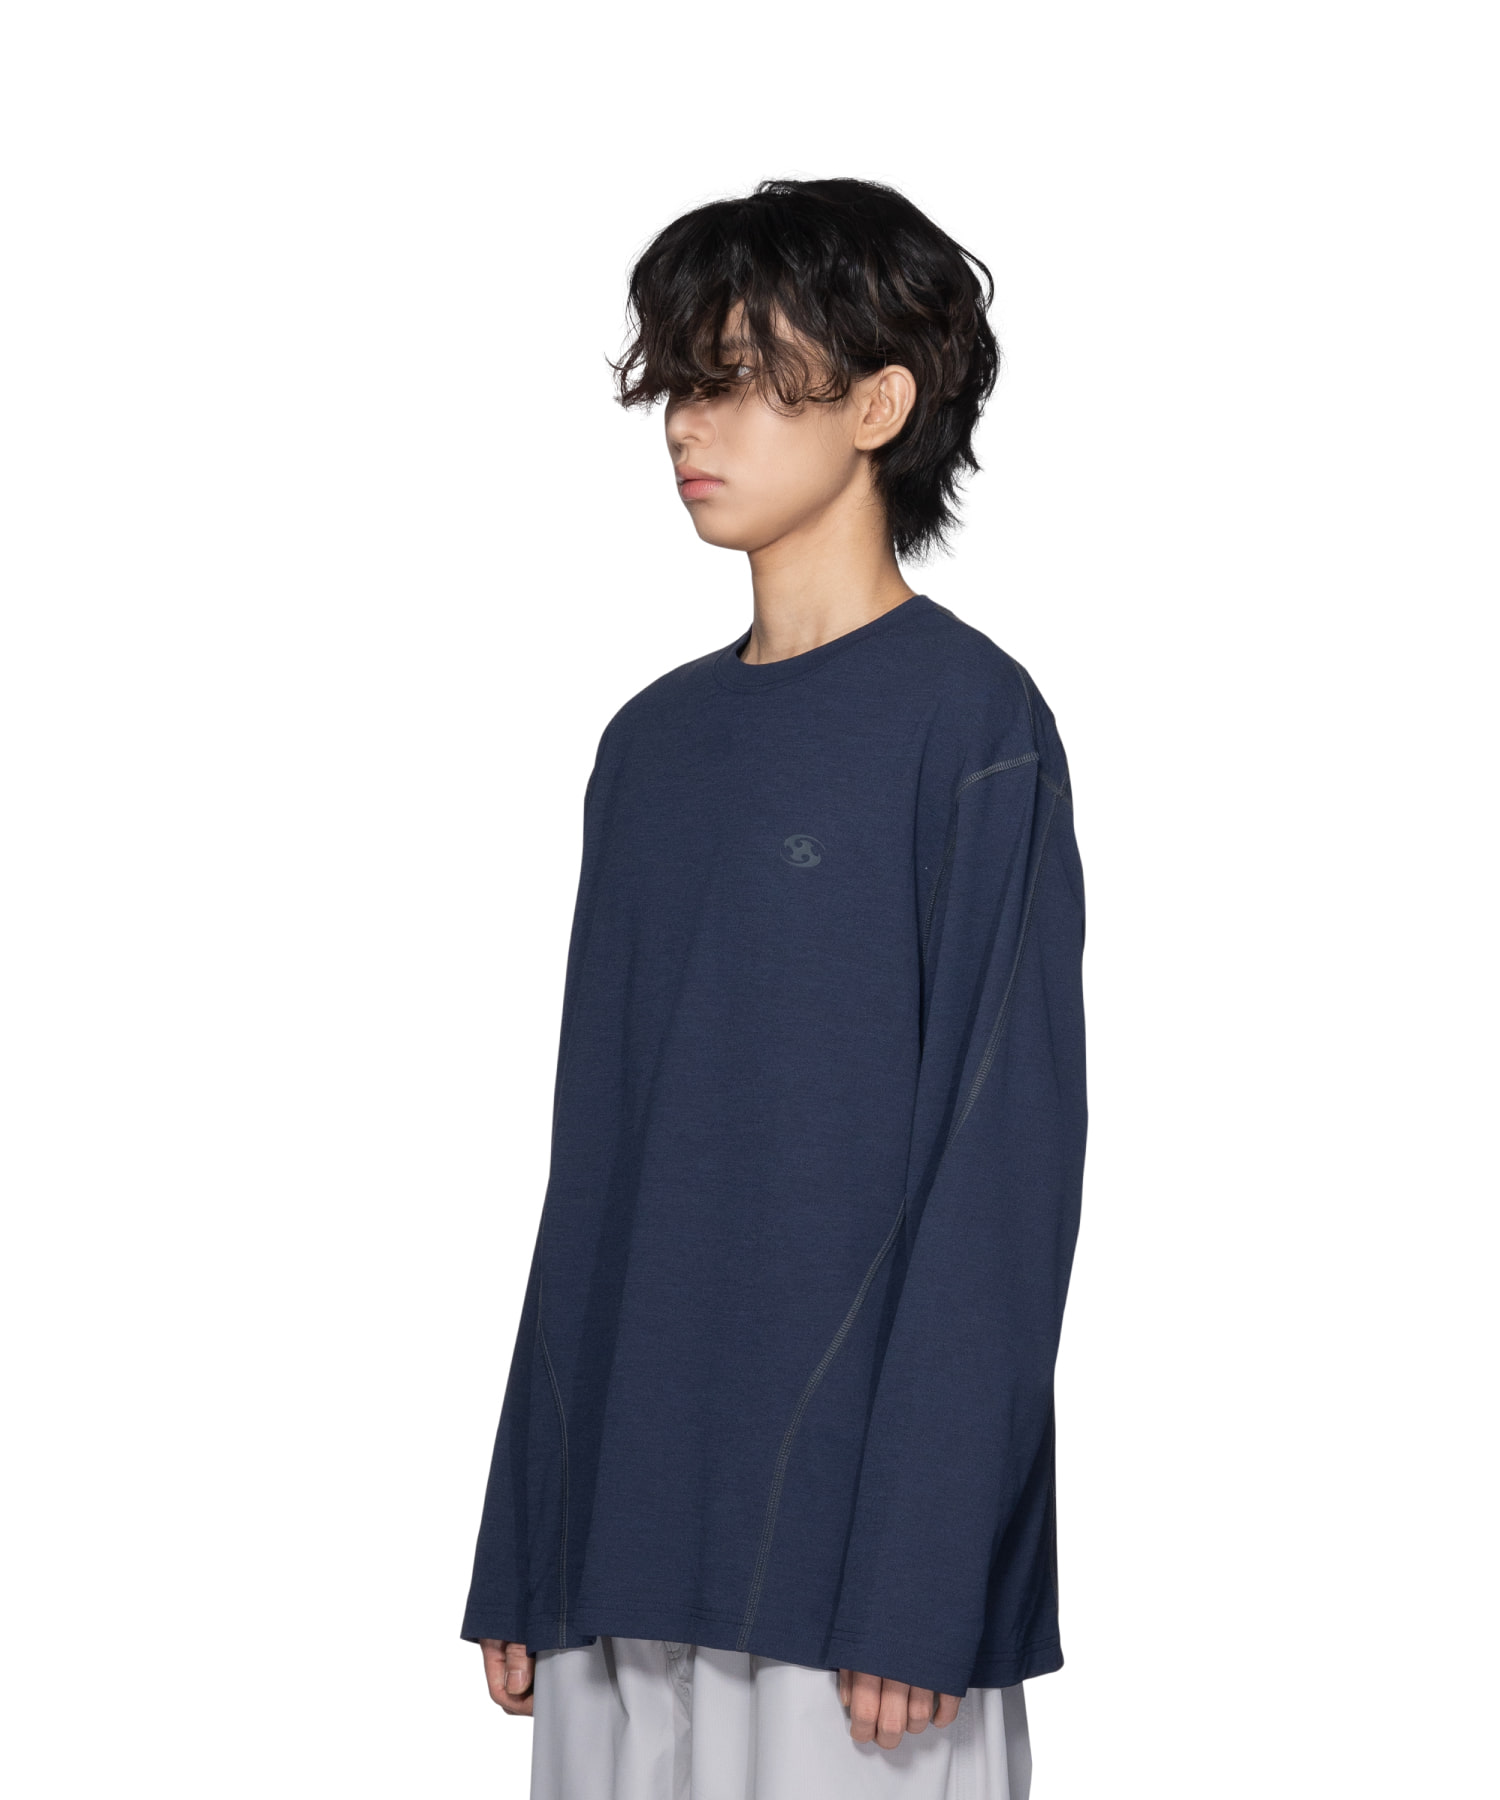 23FW STITCH LONG SLEEVES NAVY